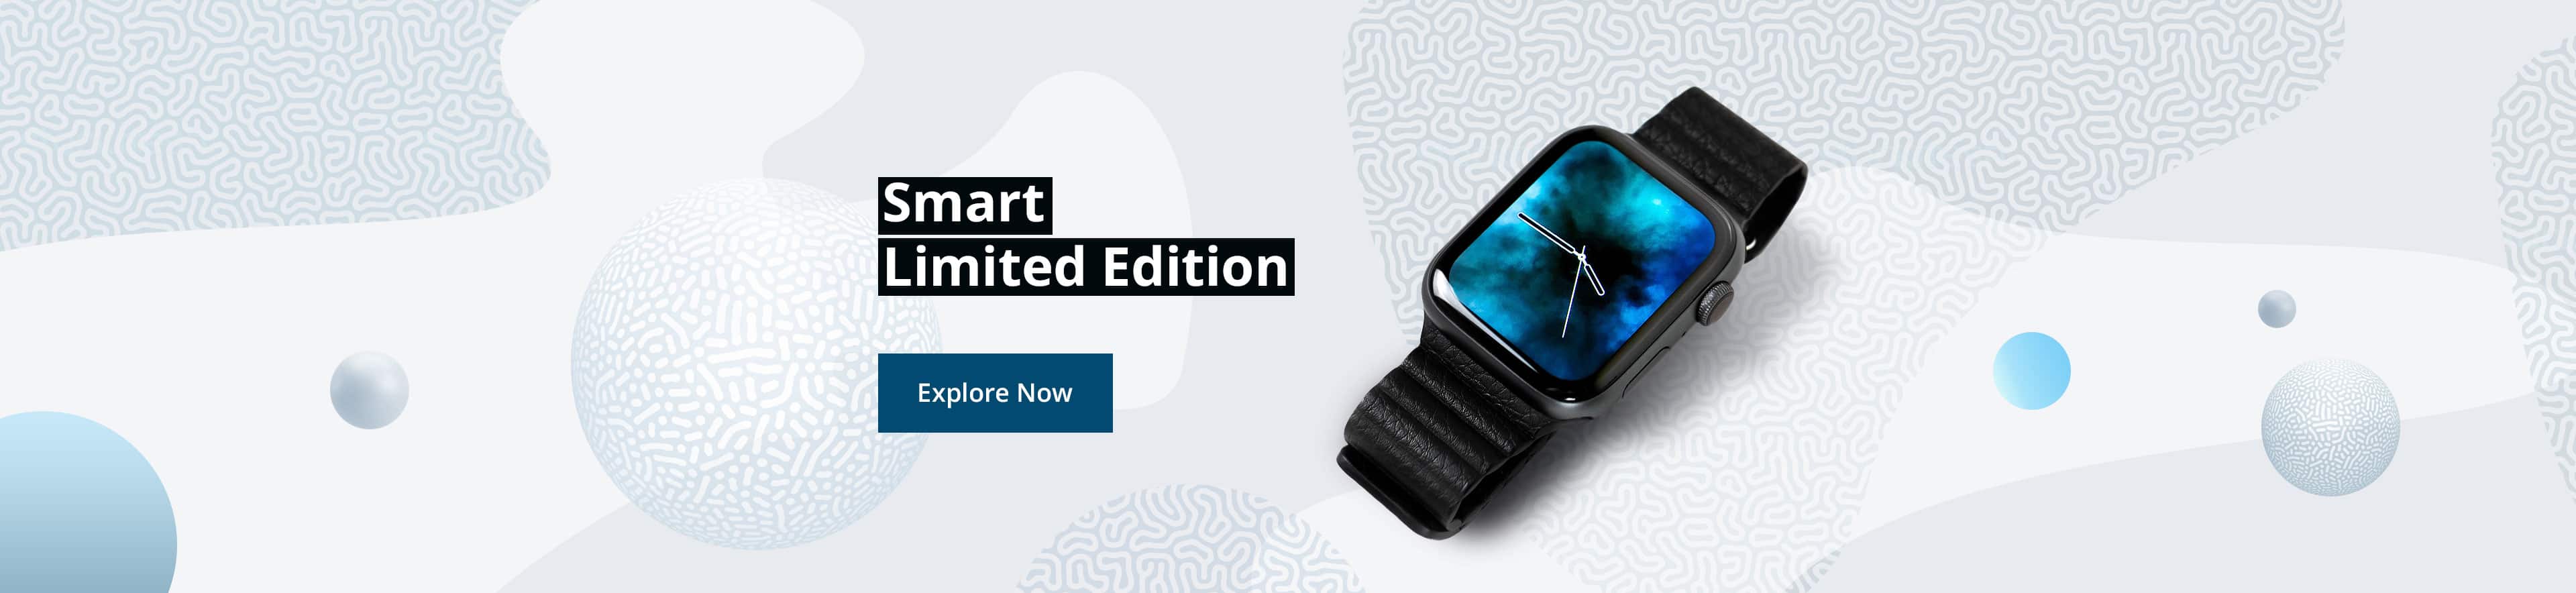 Smart Limited Edition